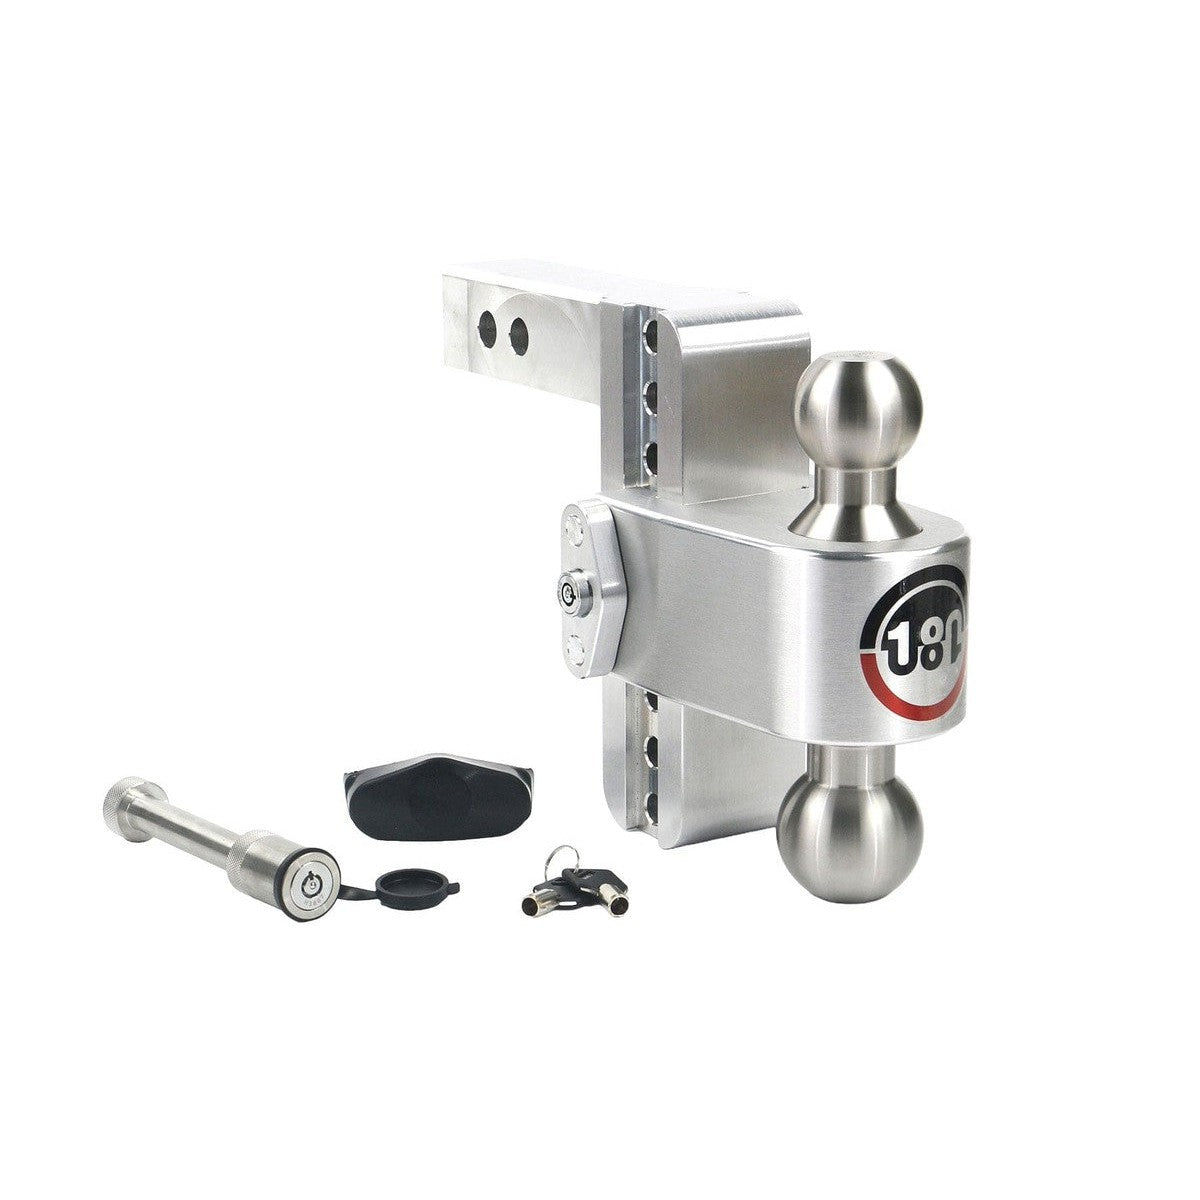 Weigh Safe Qualifies for Free Shipping Weigh Safe 180 Drop Hitch with SS Tow Ball 6" Drop for 2" & WS05 #LTB6-2-KA